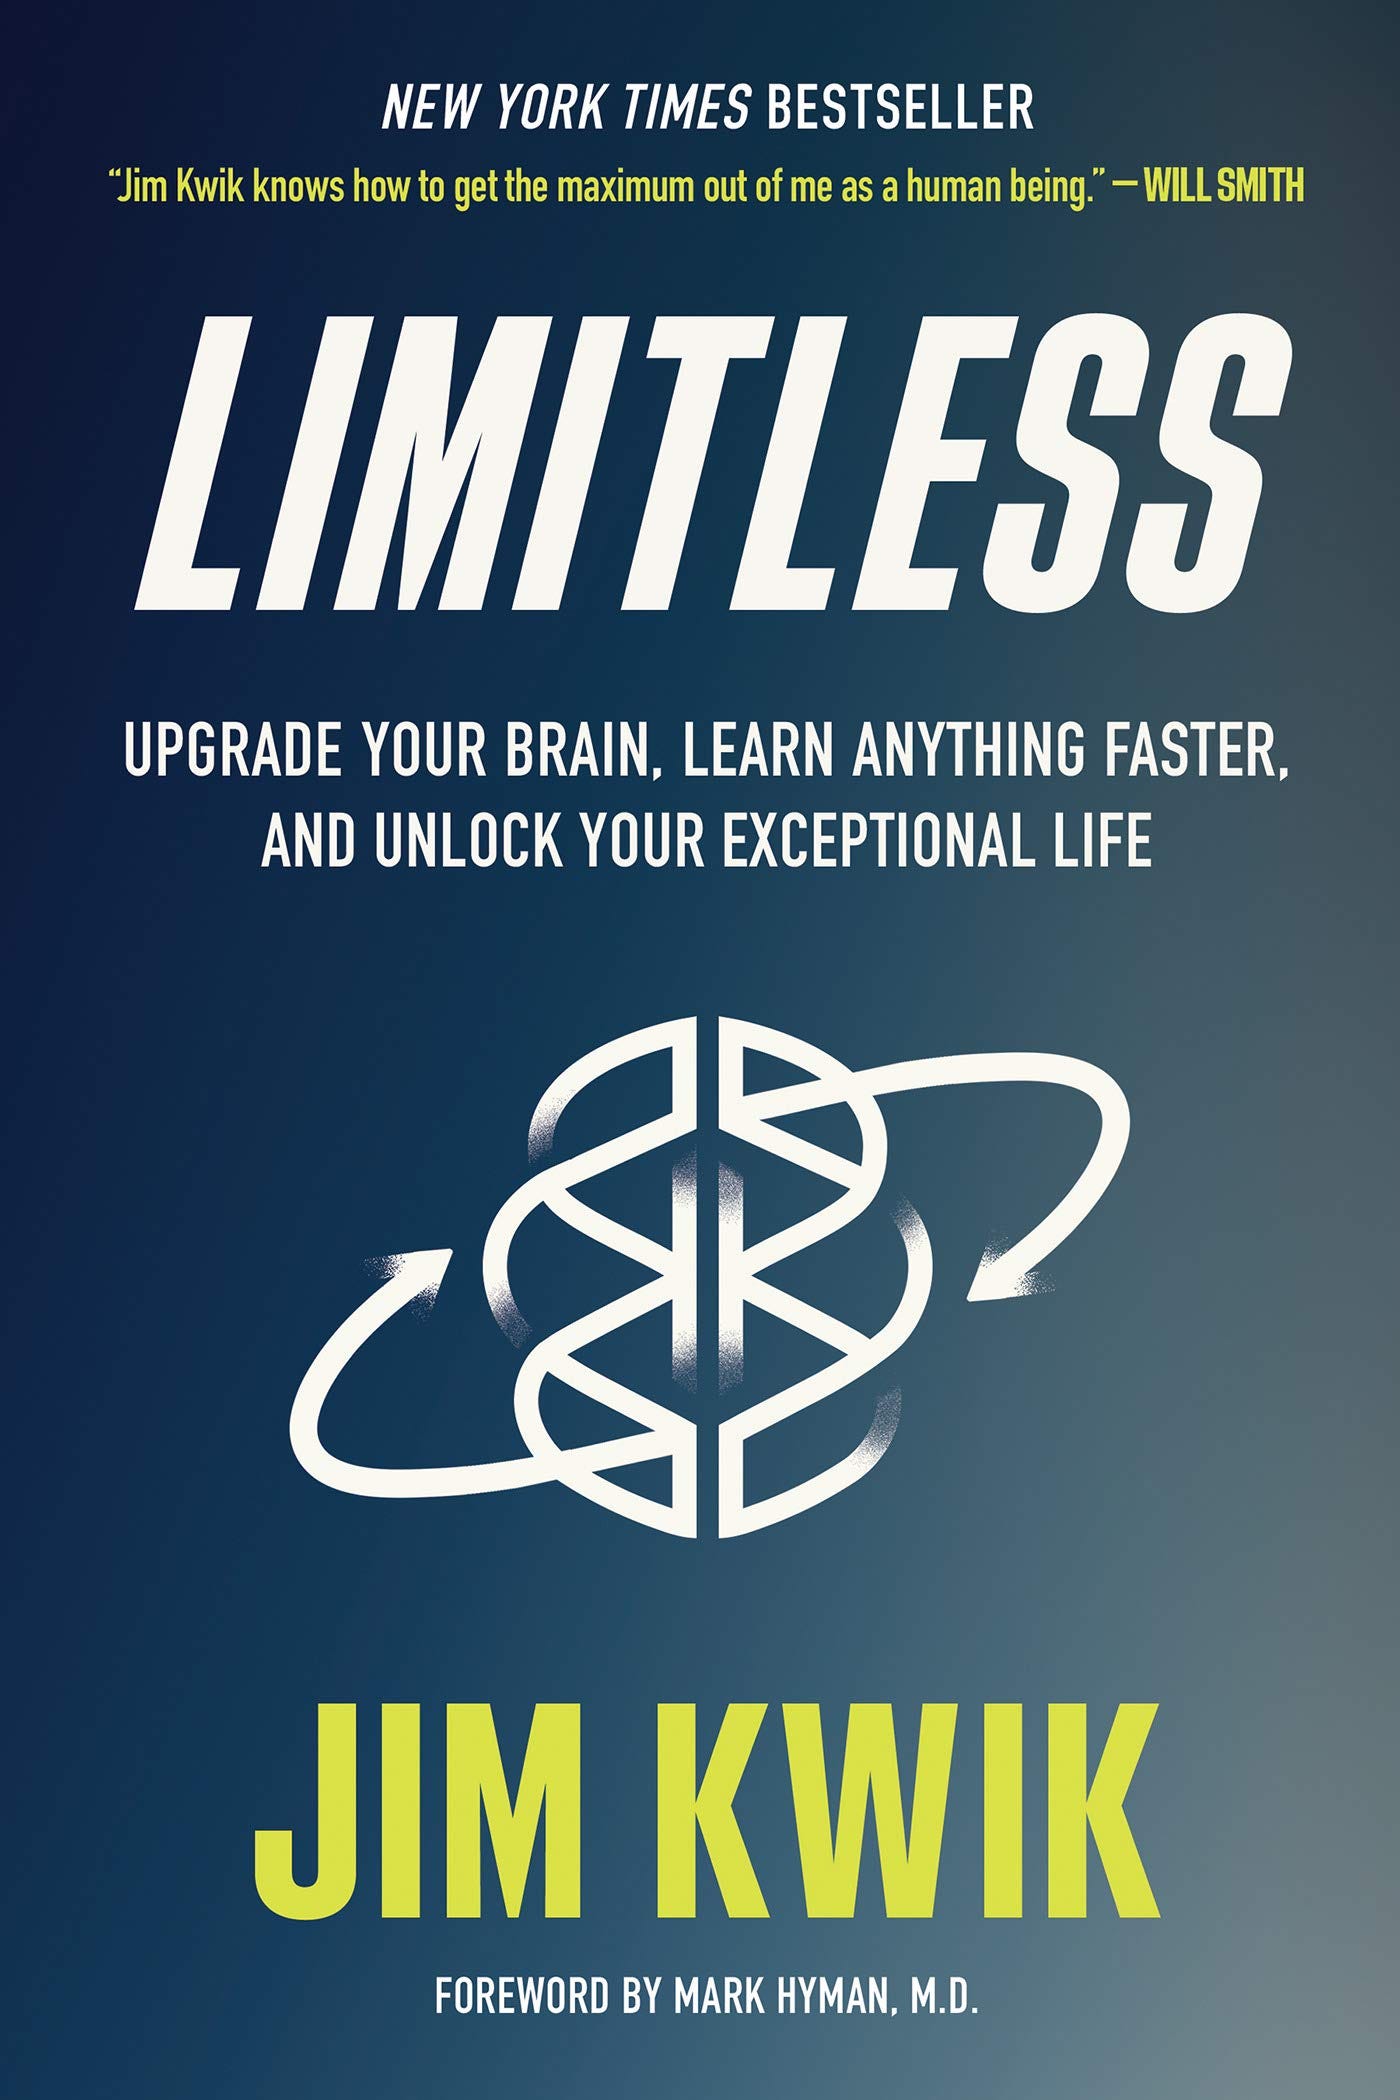 Limitless Book and Application | by Alex Chen | Medium